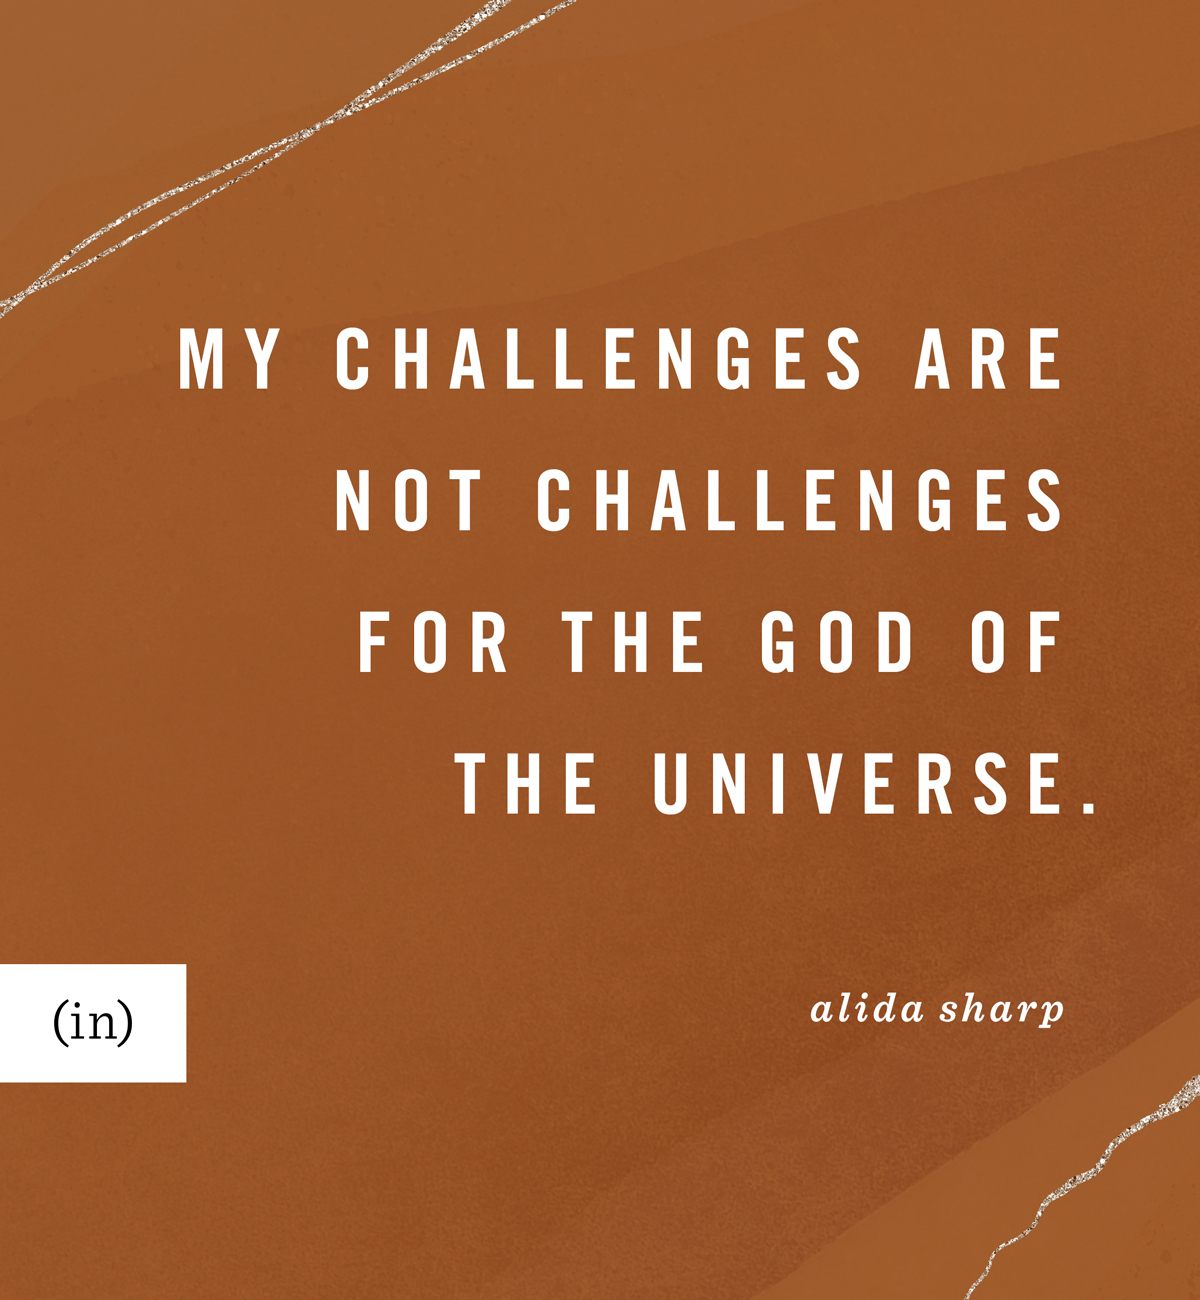 My challenges are not challenges for the God of the universe. -Alida Sharp